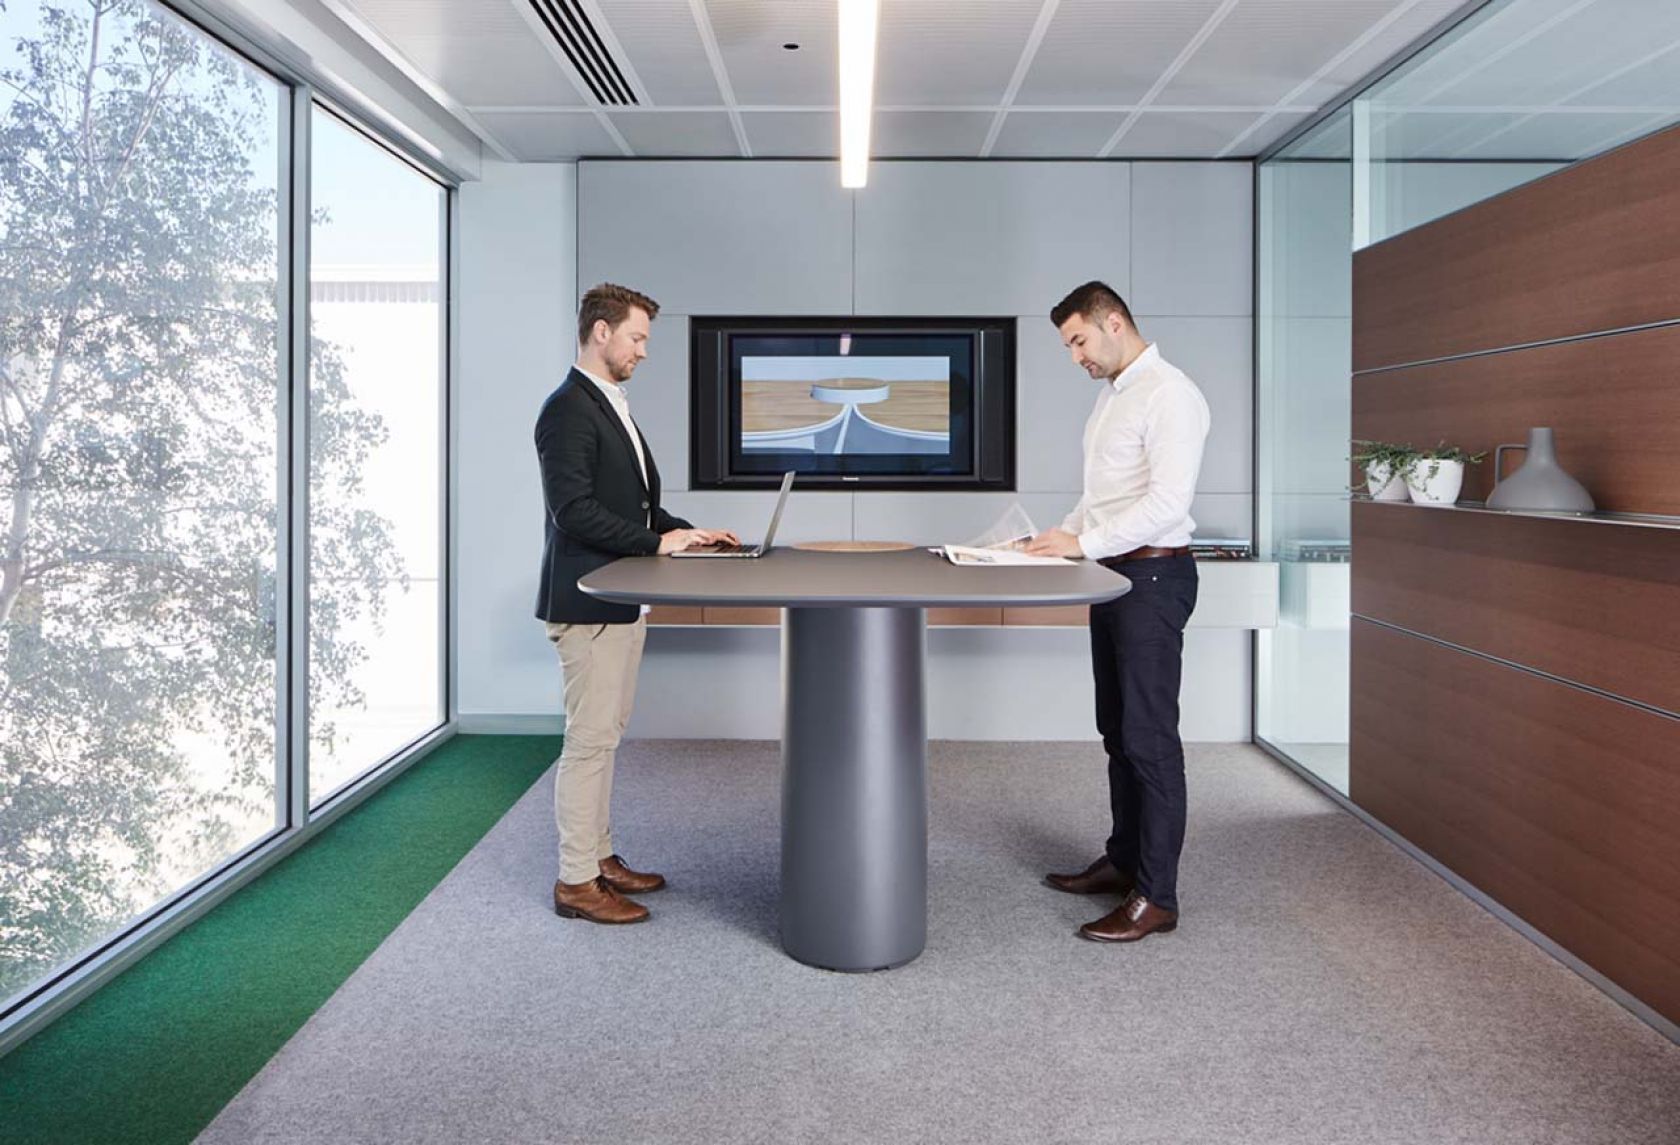 Storming Table / Malleable Workplace